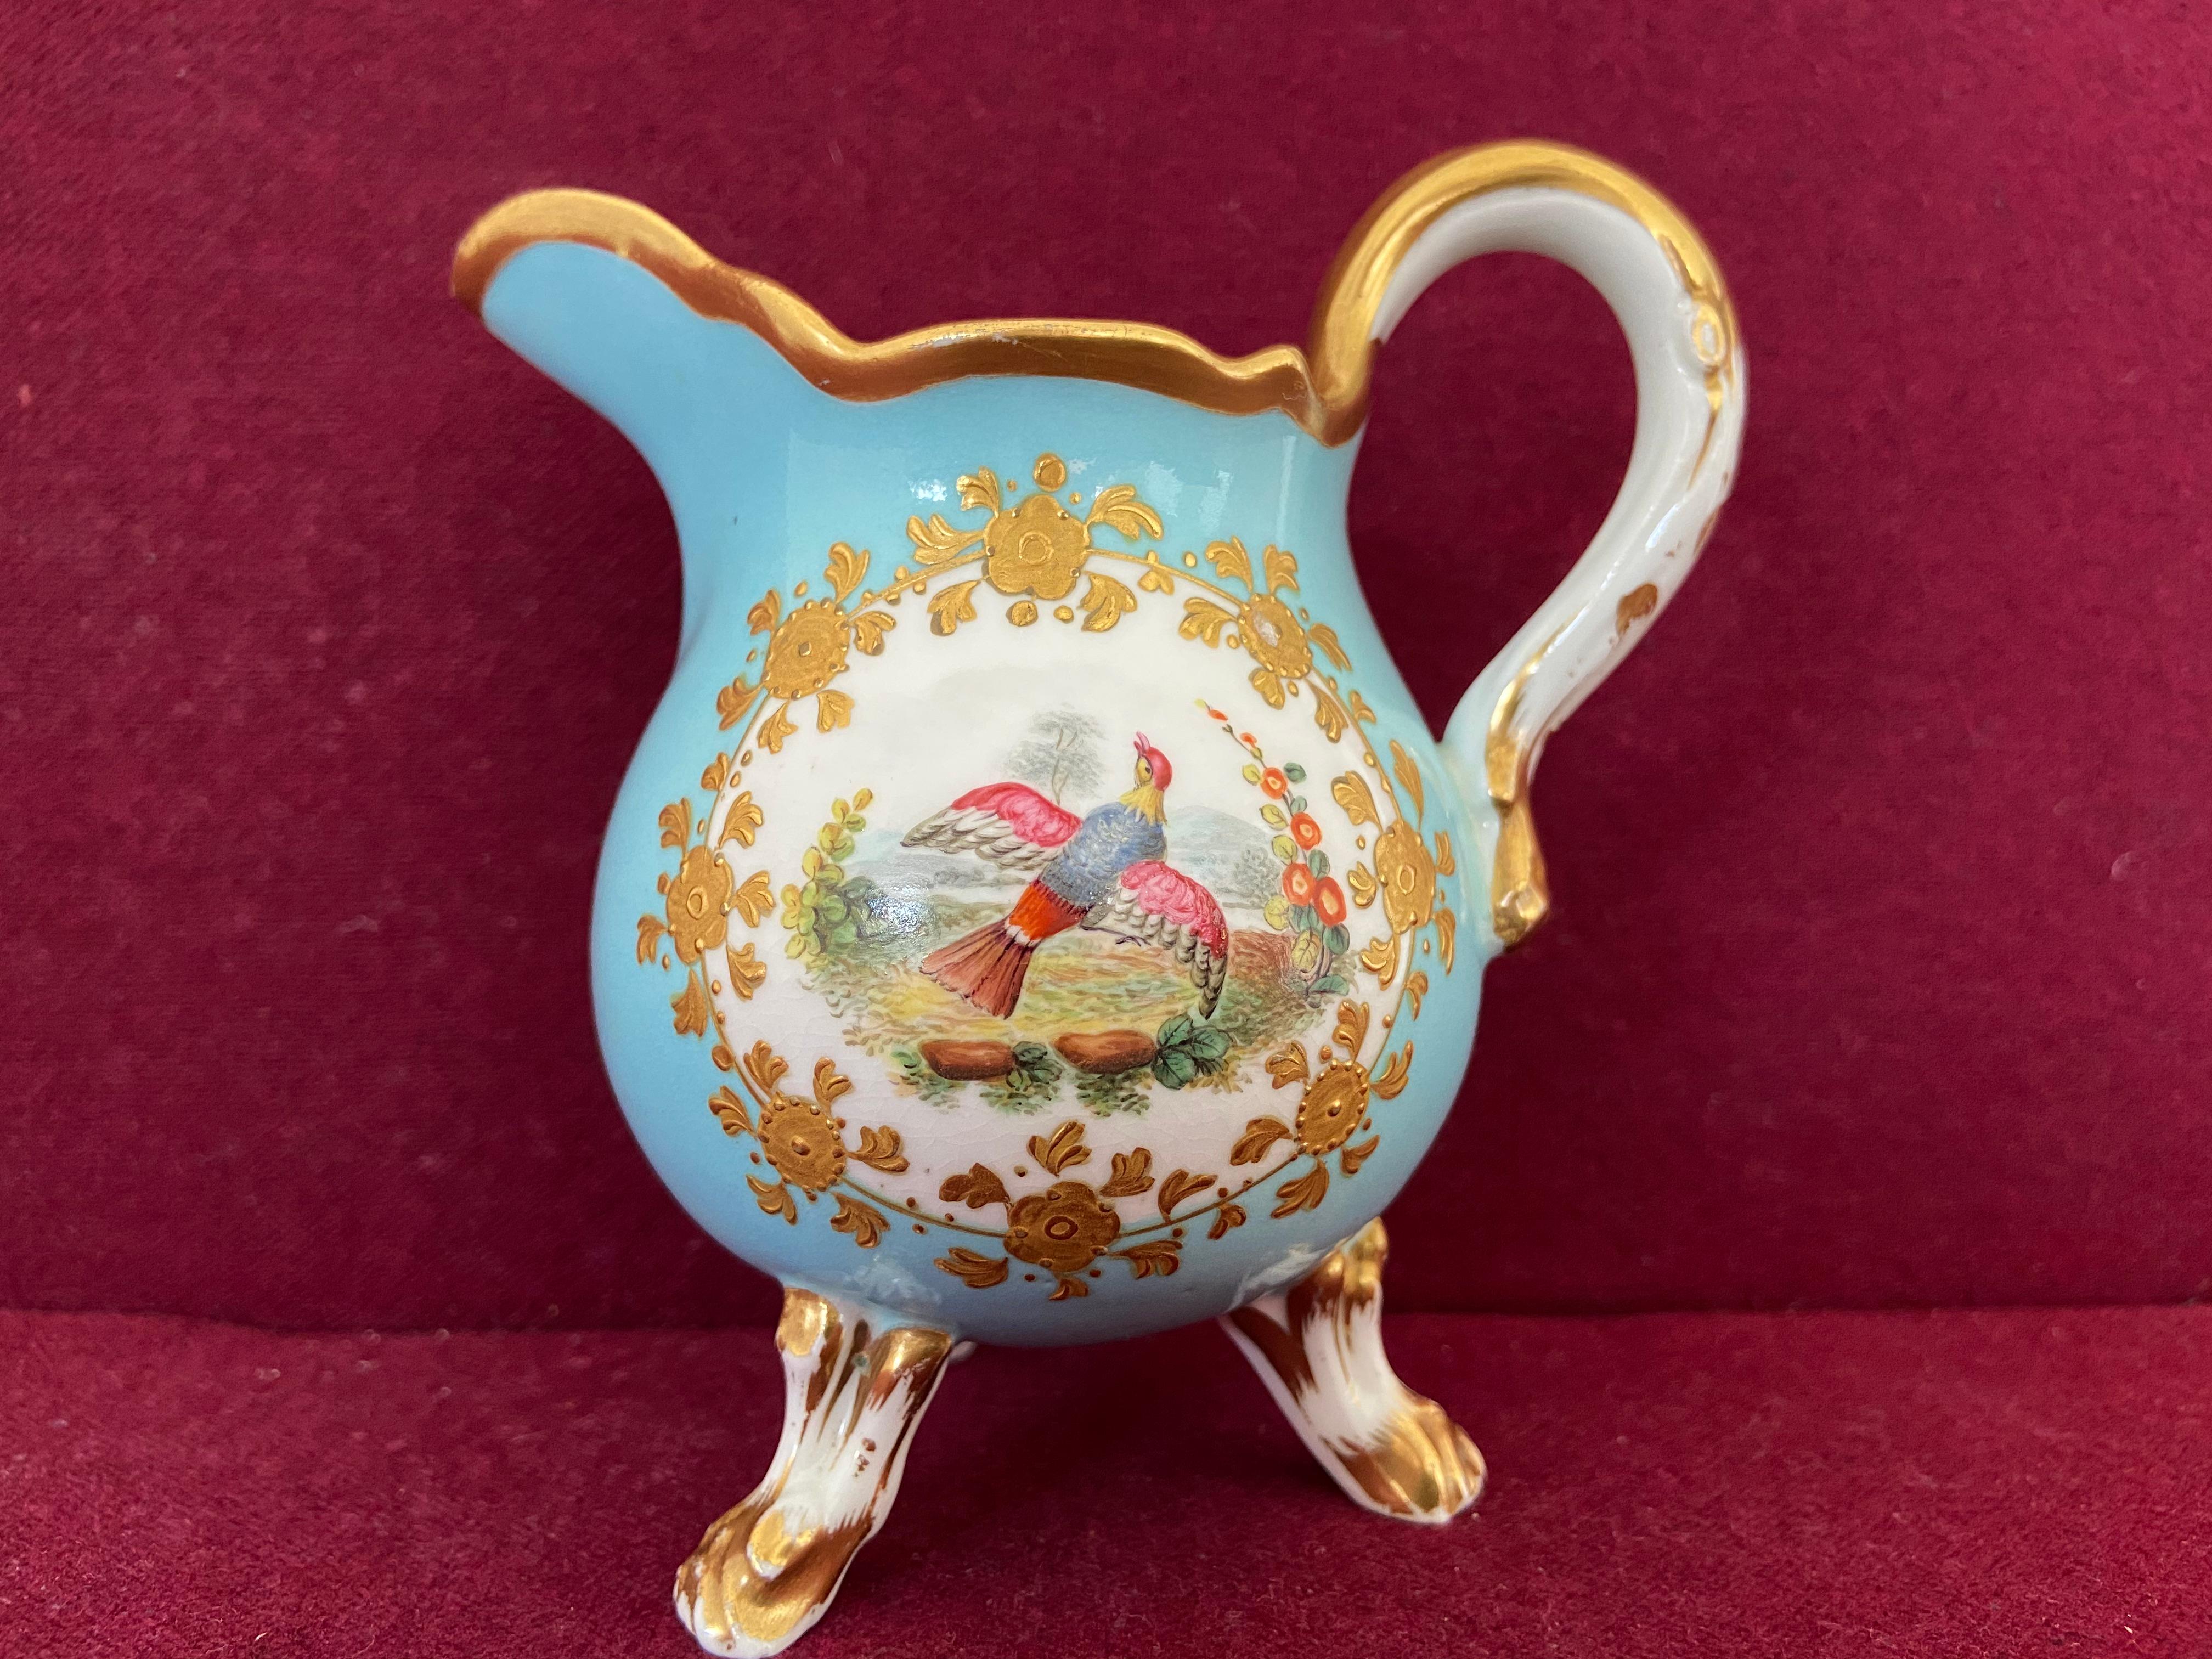 A fine Coalport Porcelain Creamer c.1835 standing on three legs. Decorated with a fancy bird in a roundel with raised gilt decoration on a duck egg blue ground.  The painted bird decoration is in the manner of John Randall. Unmarked.

Condition: